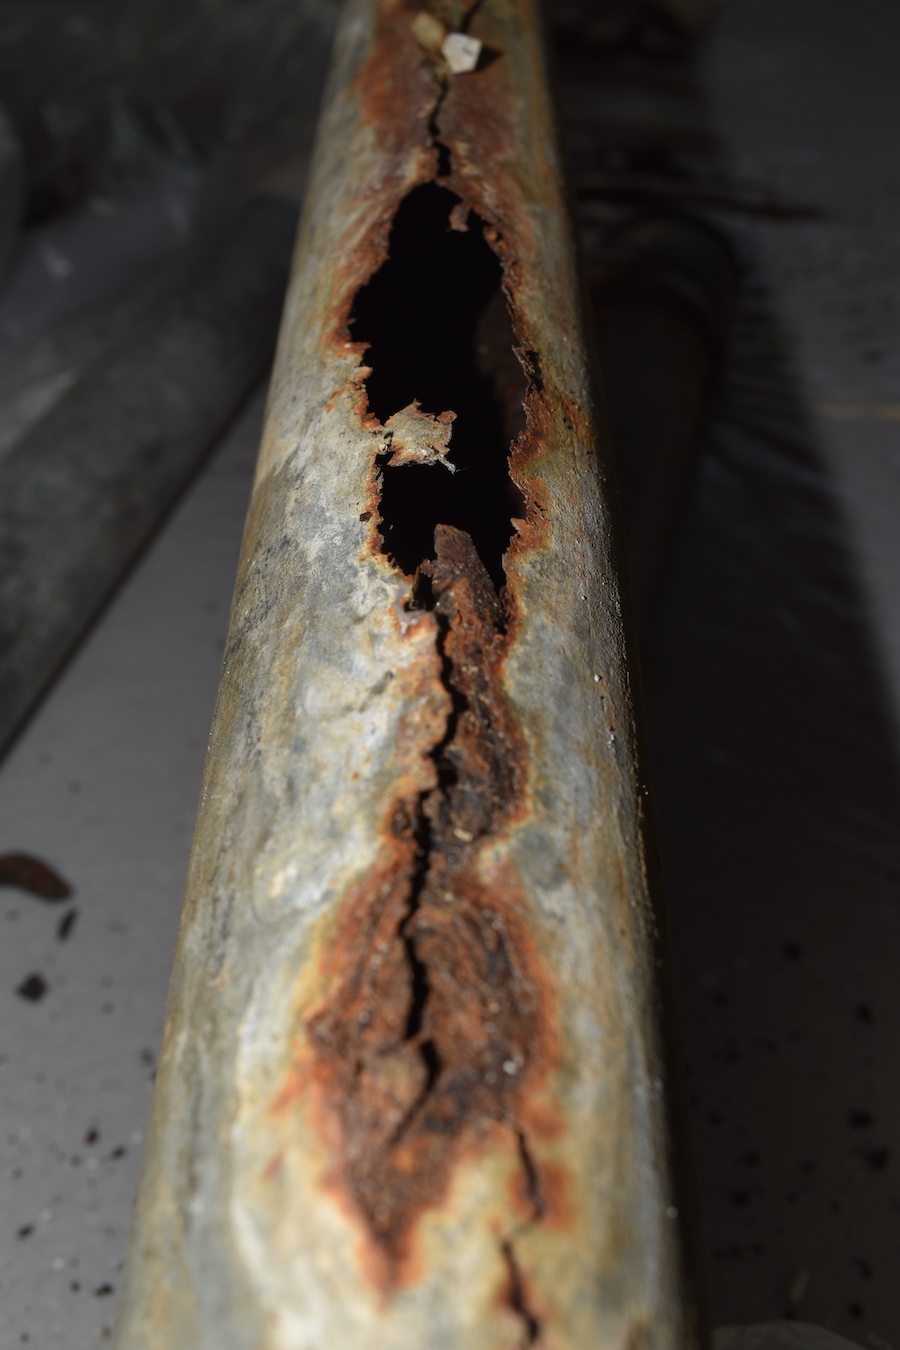 Cracked vent pipe